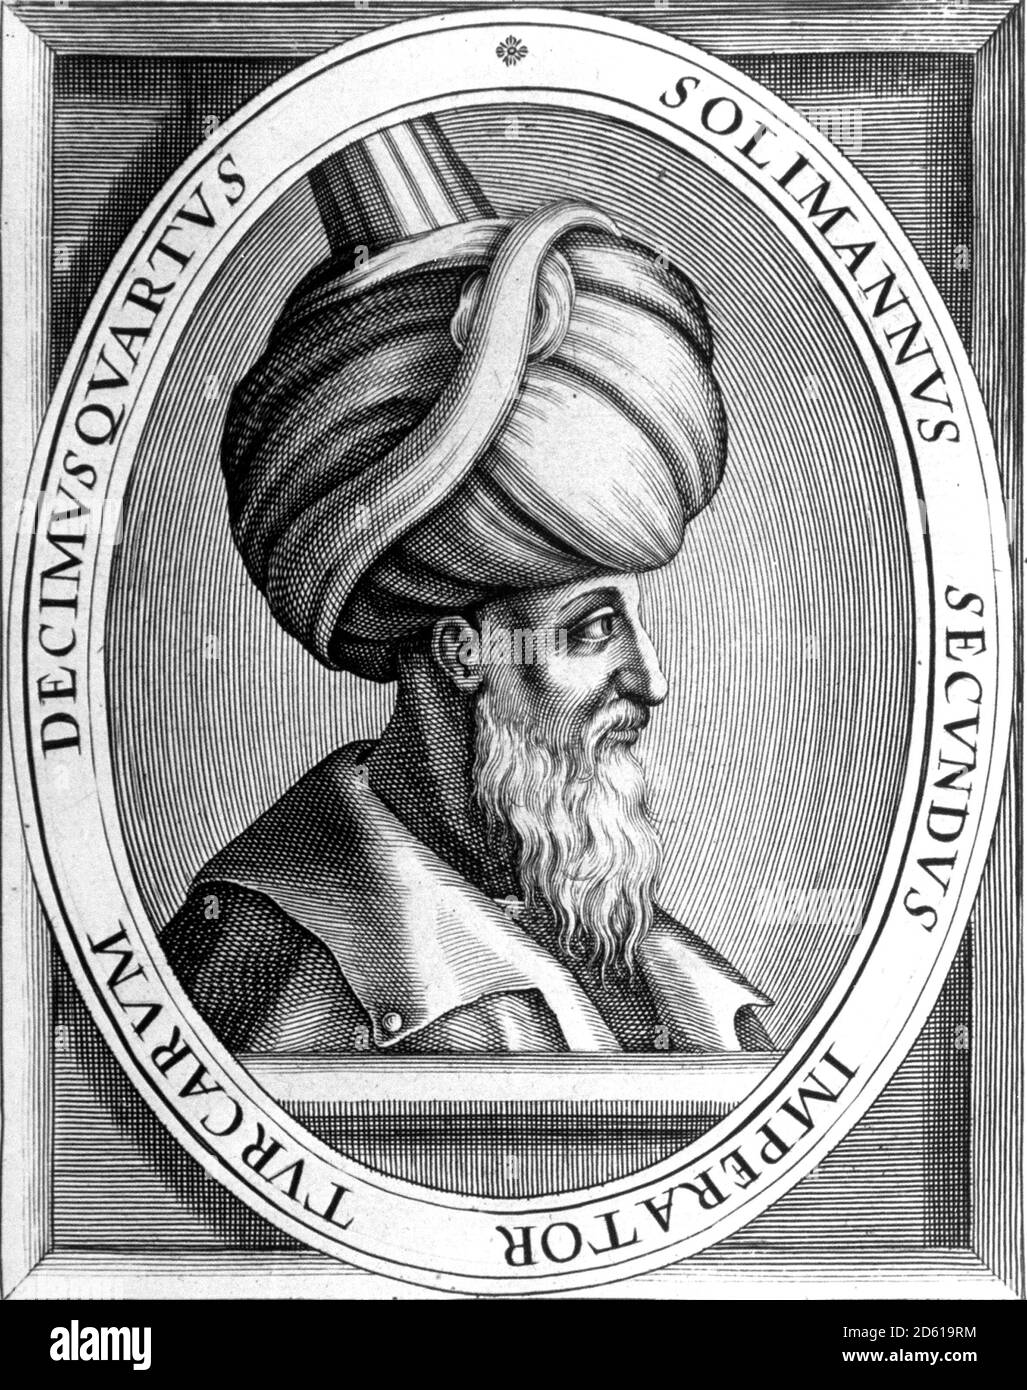 Suleiman the Magnificent. Portrait of the tenth and longest-reigning Sultan of the Ottoman Empire, Suleiman I (1494-1566), engraving c.1900 Stock Photo